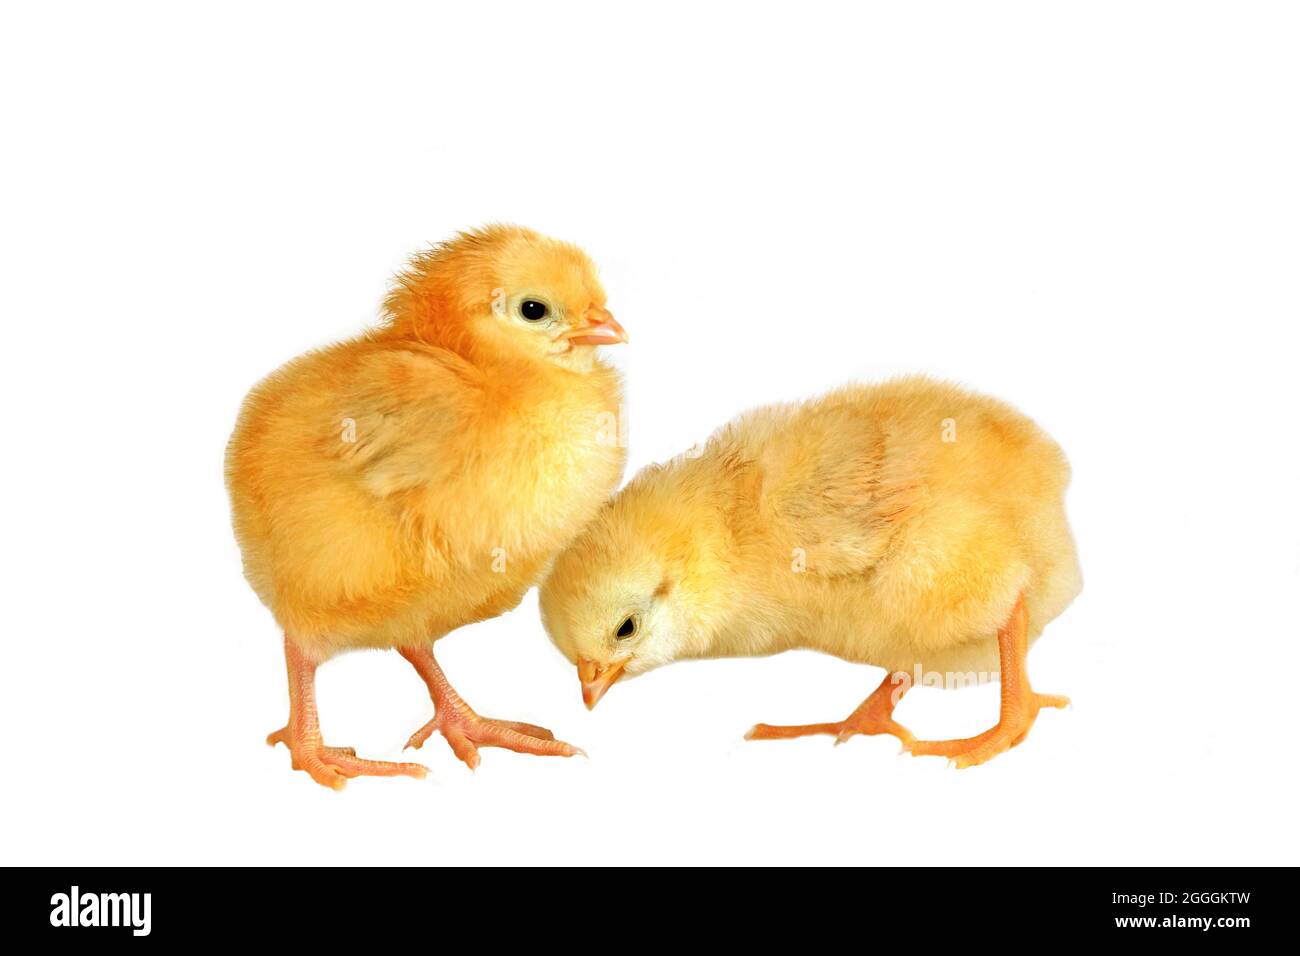 Chicken, two adorable Chicks few days old  together on white background. Stock Photo